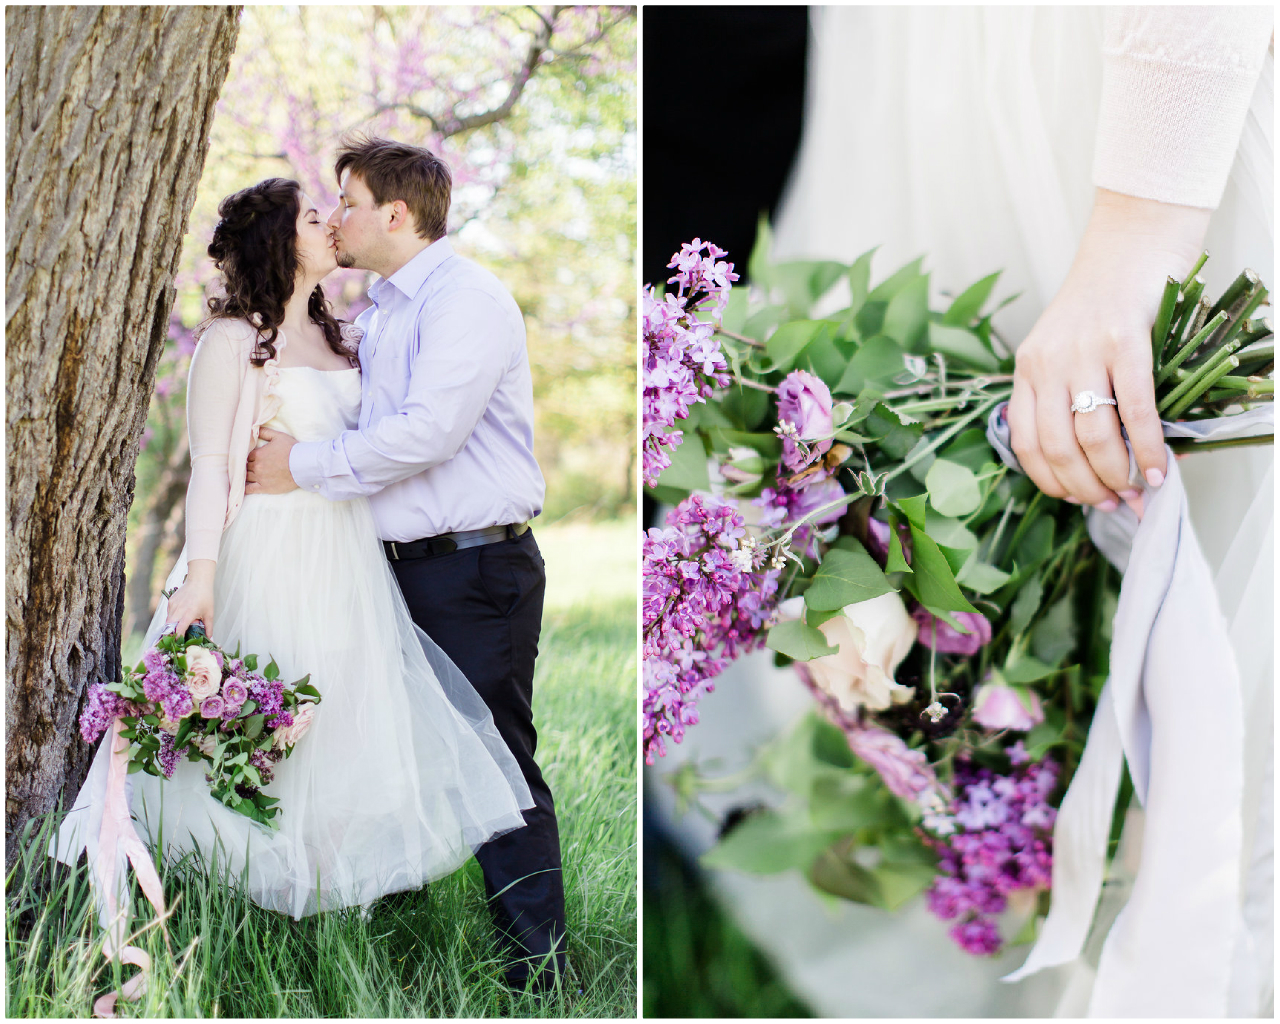 Lilac Engagement Session | The Day's Design | Ashley Slater Photography